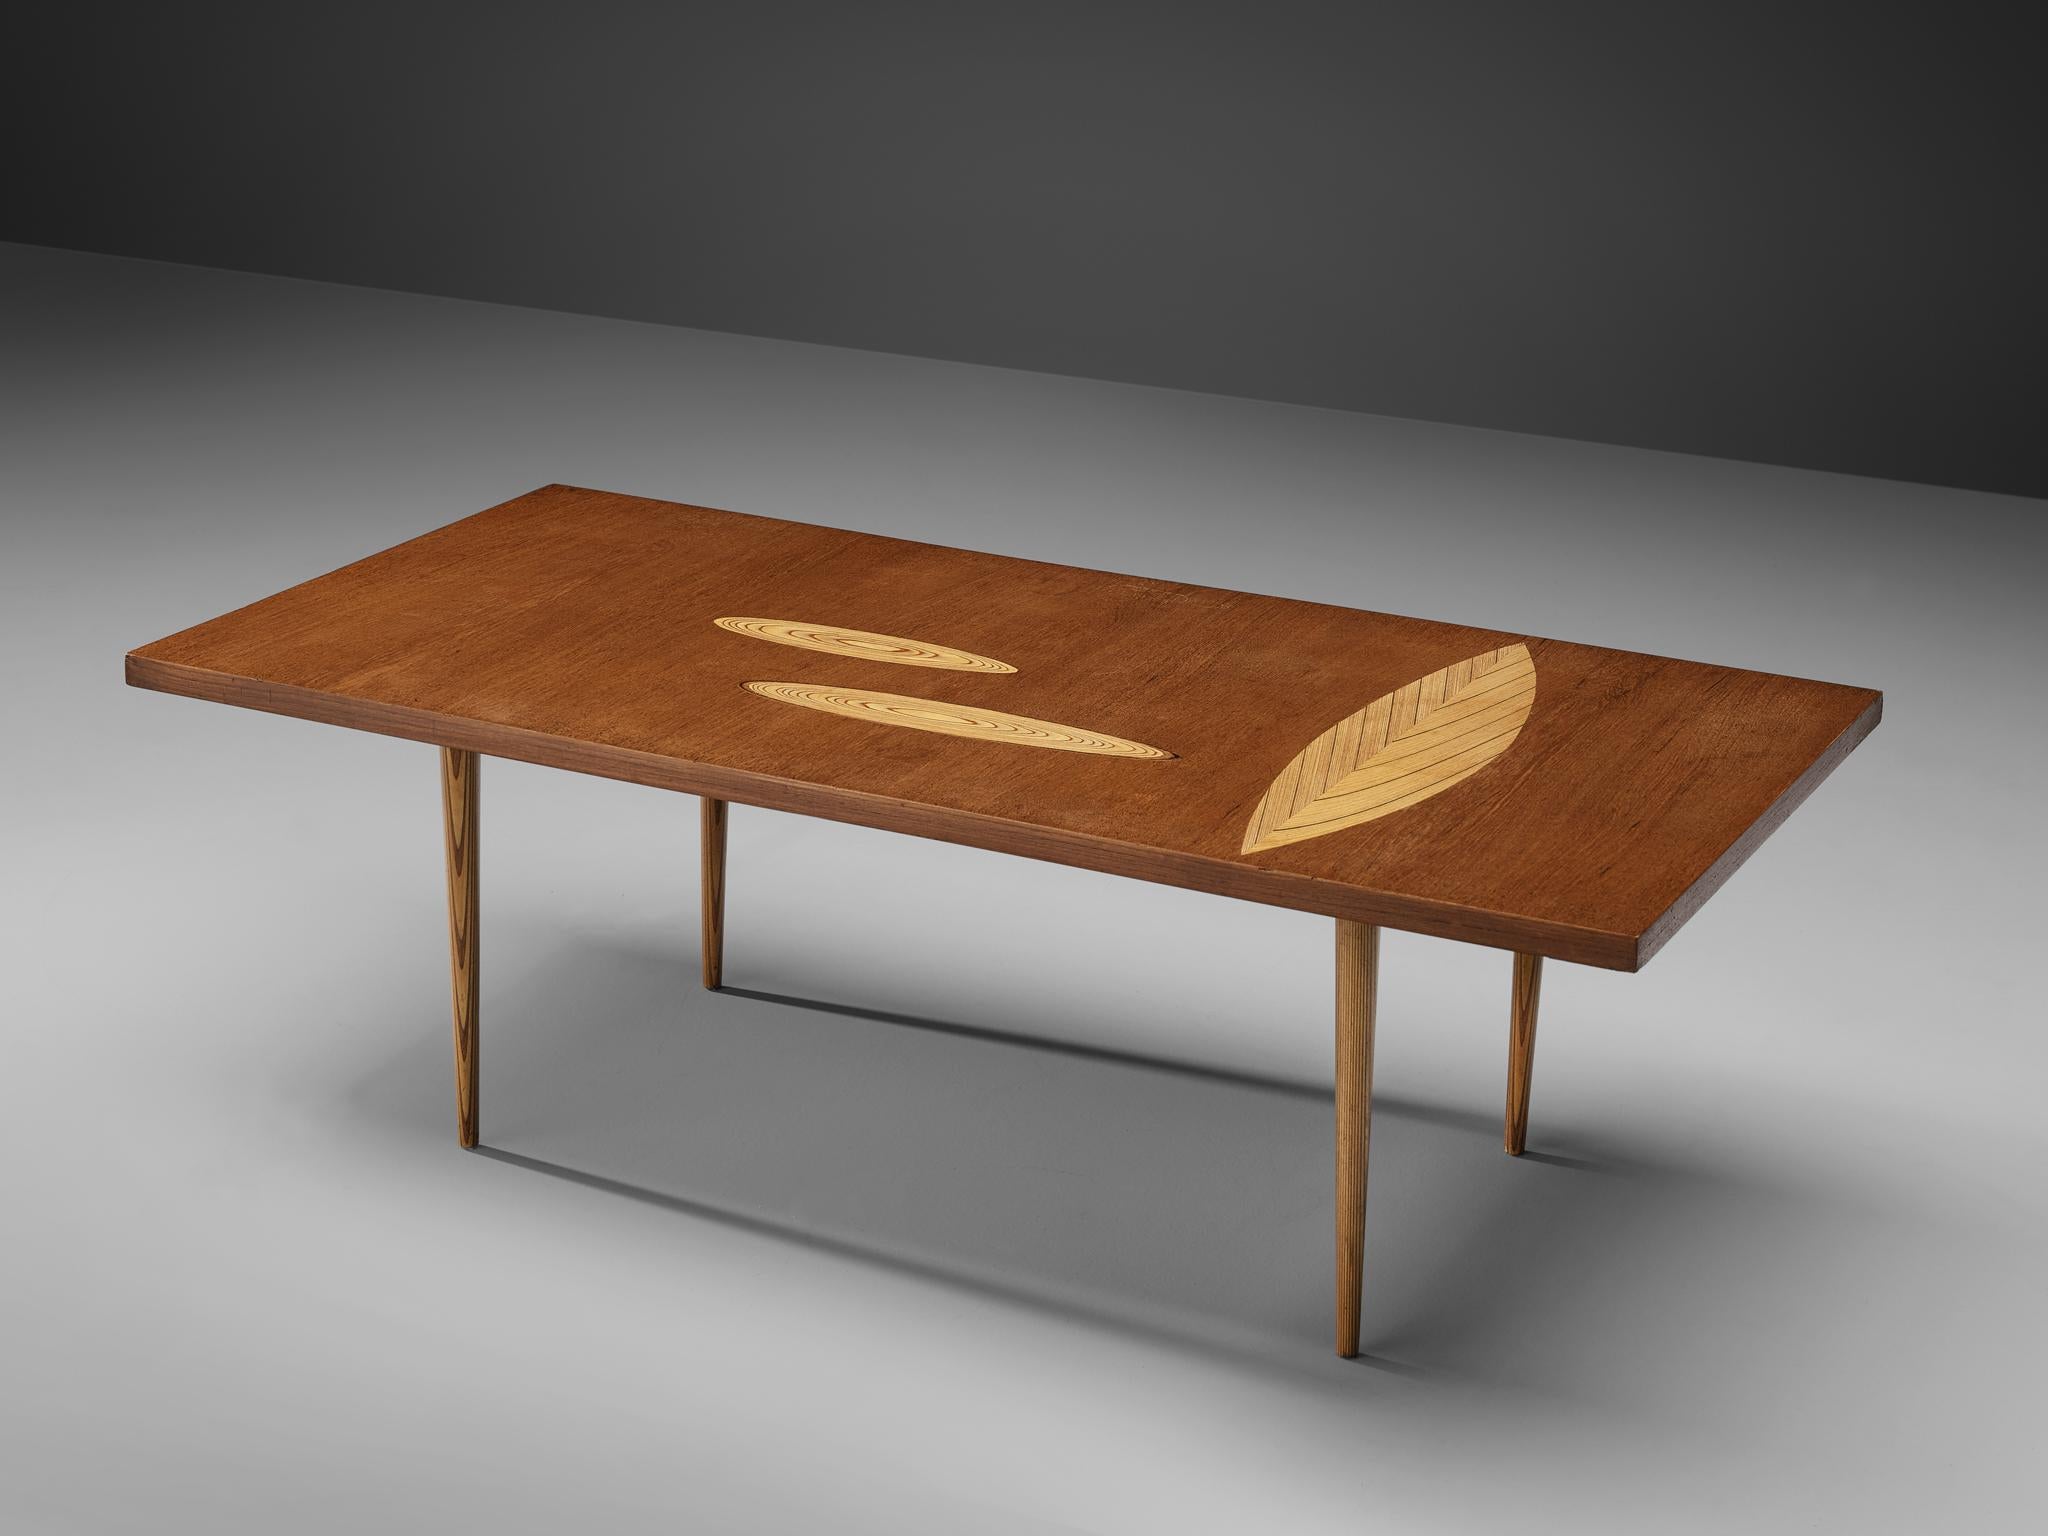 Tapio Wirkkala for Asko, cocktail table, teak, Finland, 1960s.

Teak coffee table with wooden inlay ornaments designed by Tapio Wirkkala. The table is produced by Asko. This coffee table is one of Wirkkala's iconic furniture designs. Made with three